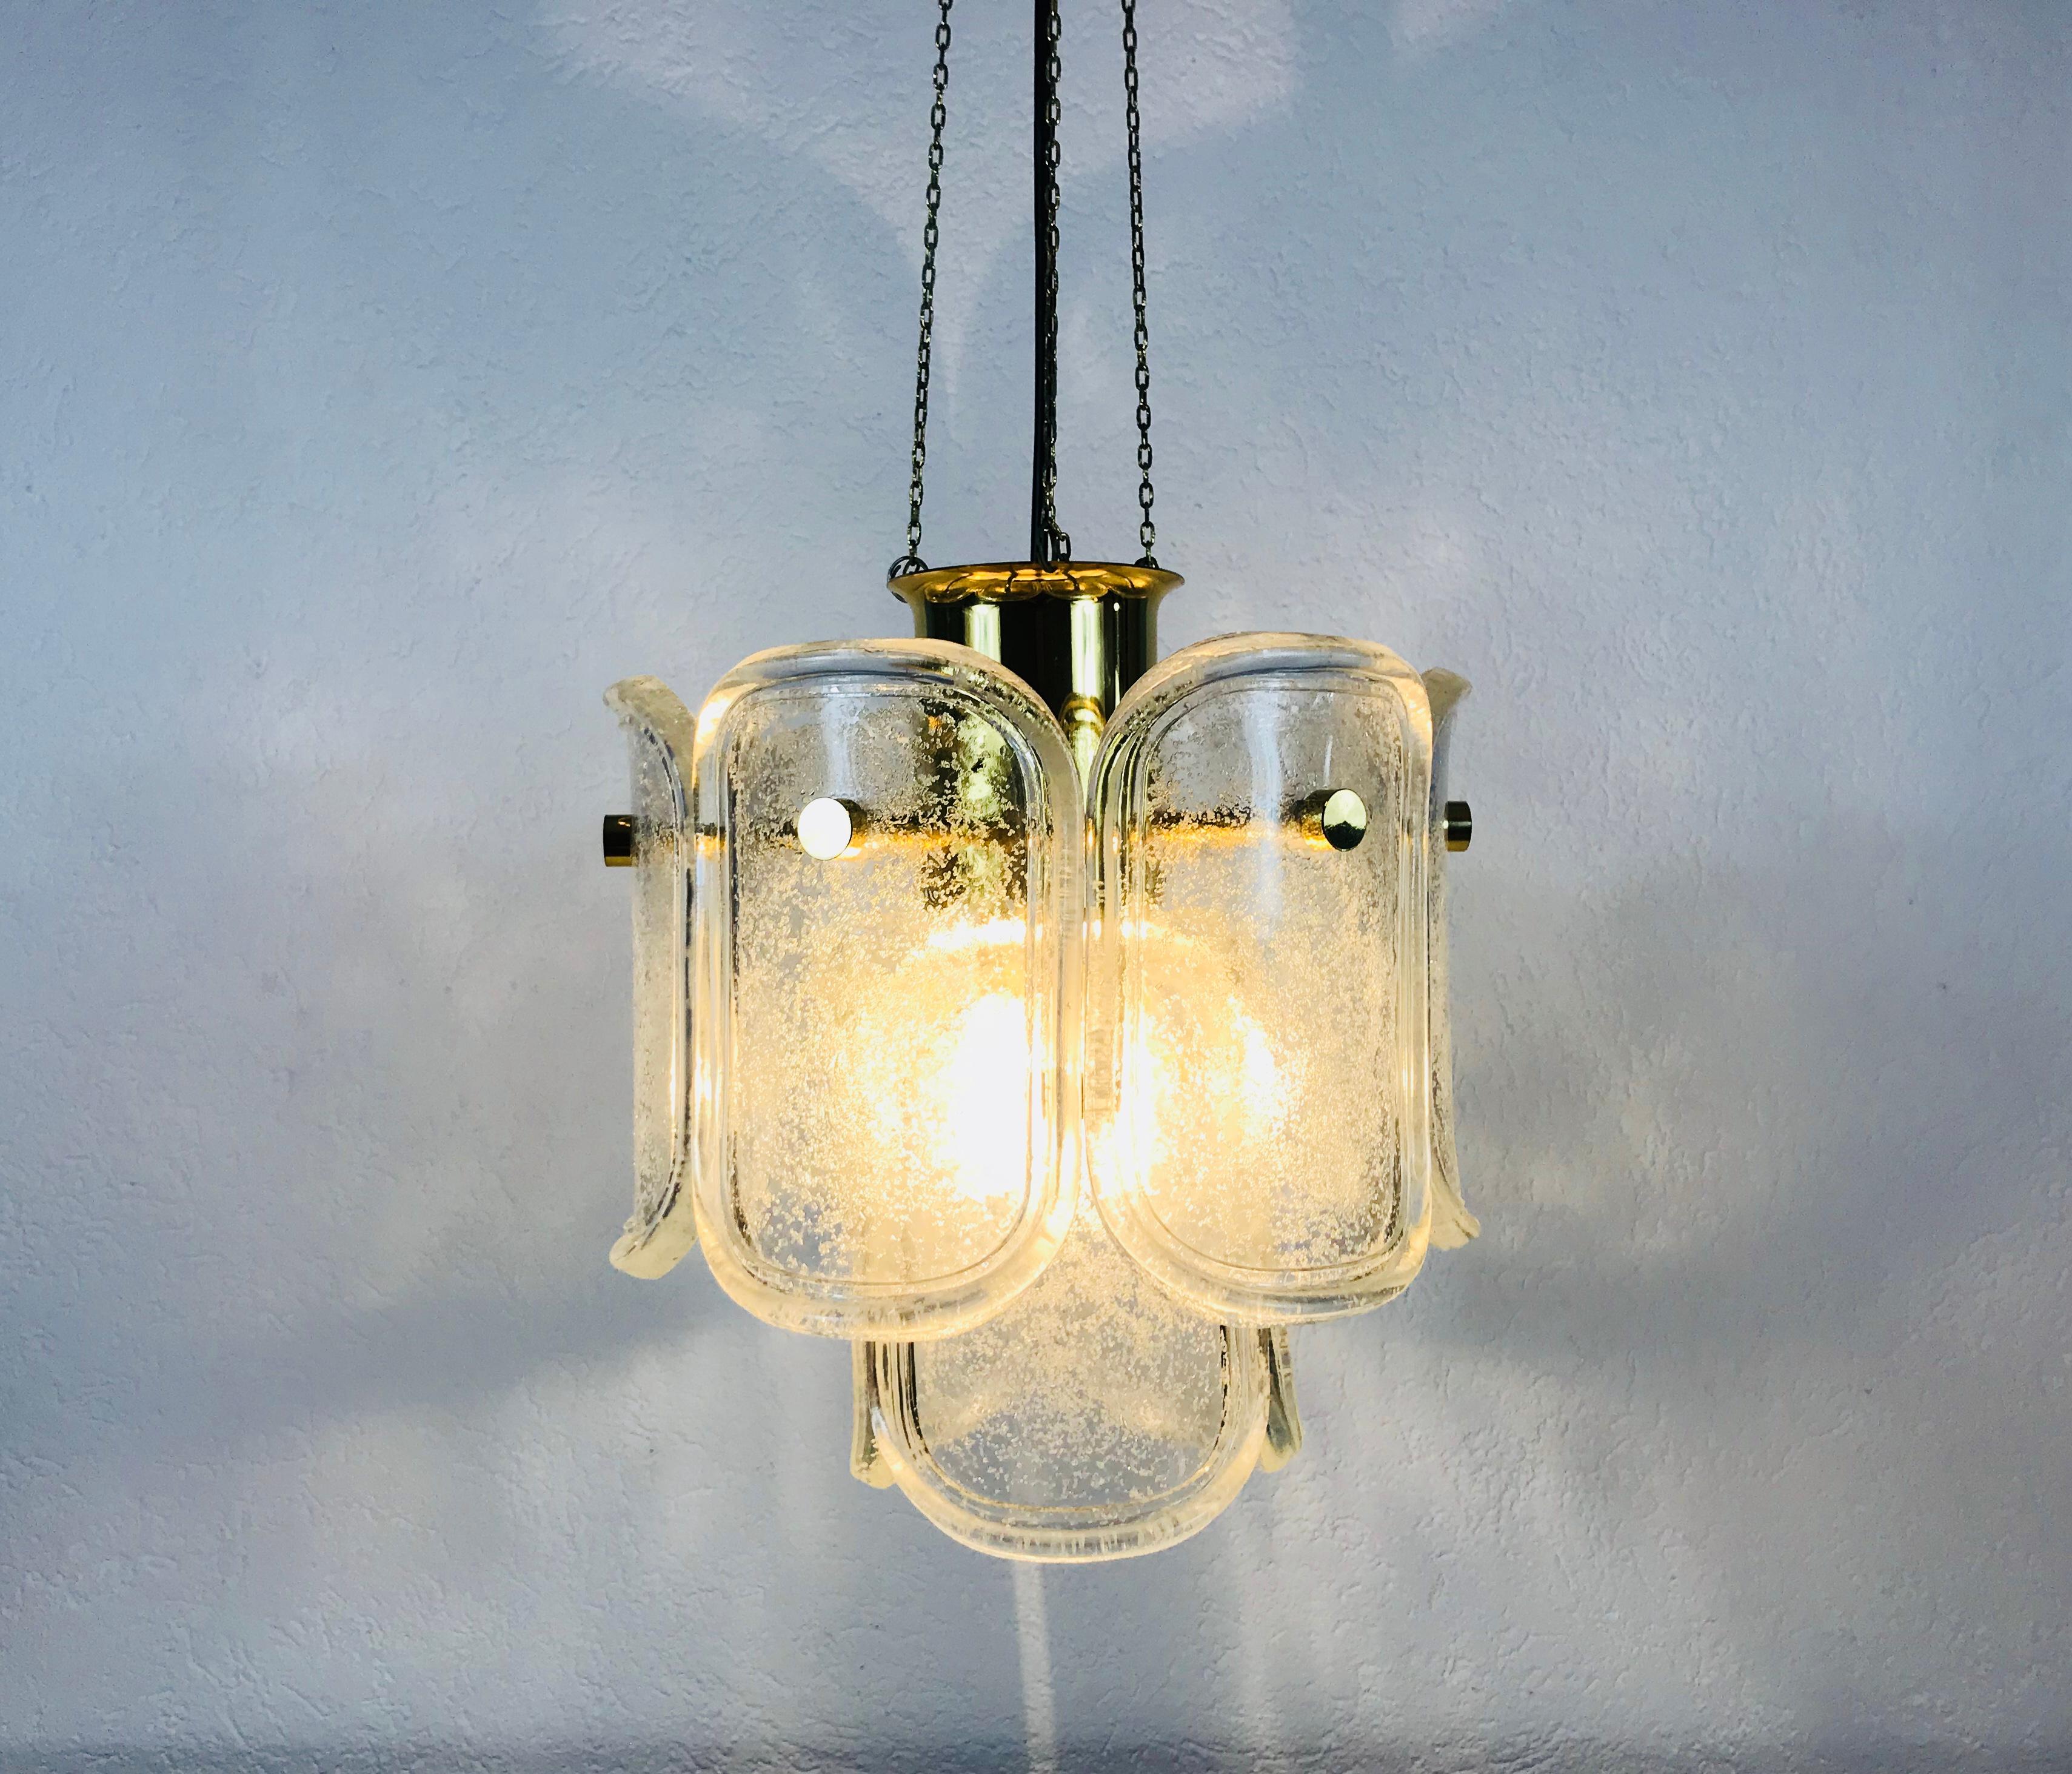 A Limburg ice glass chandelier made in Germany in the 1960s. It is fascinating with its extraordinary glass shapes. Round two-tier brass body with golden chains.

The light requires one E27 light bulb.